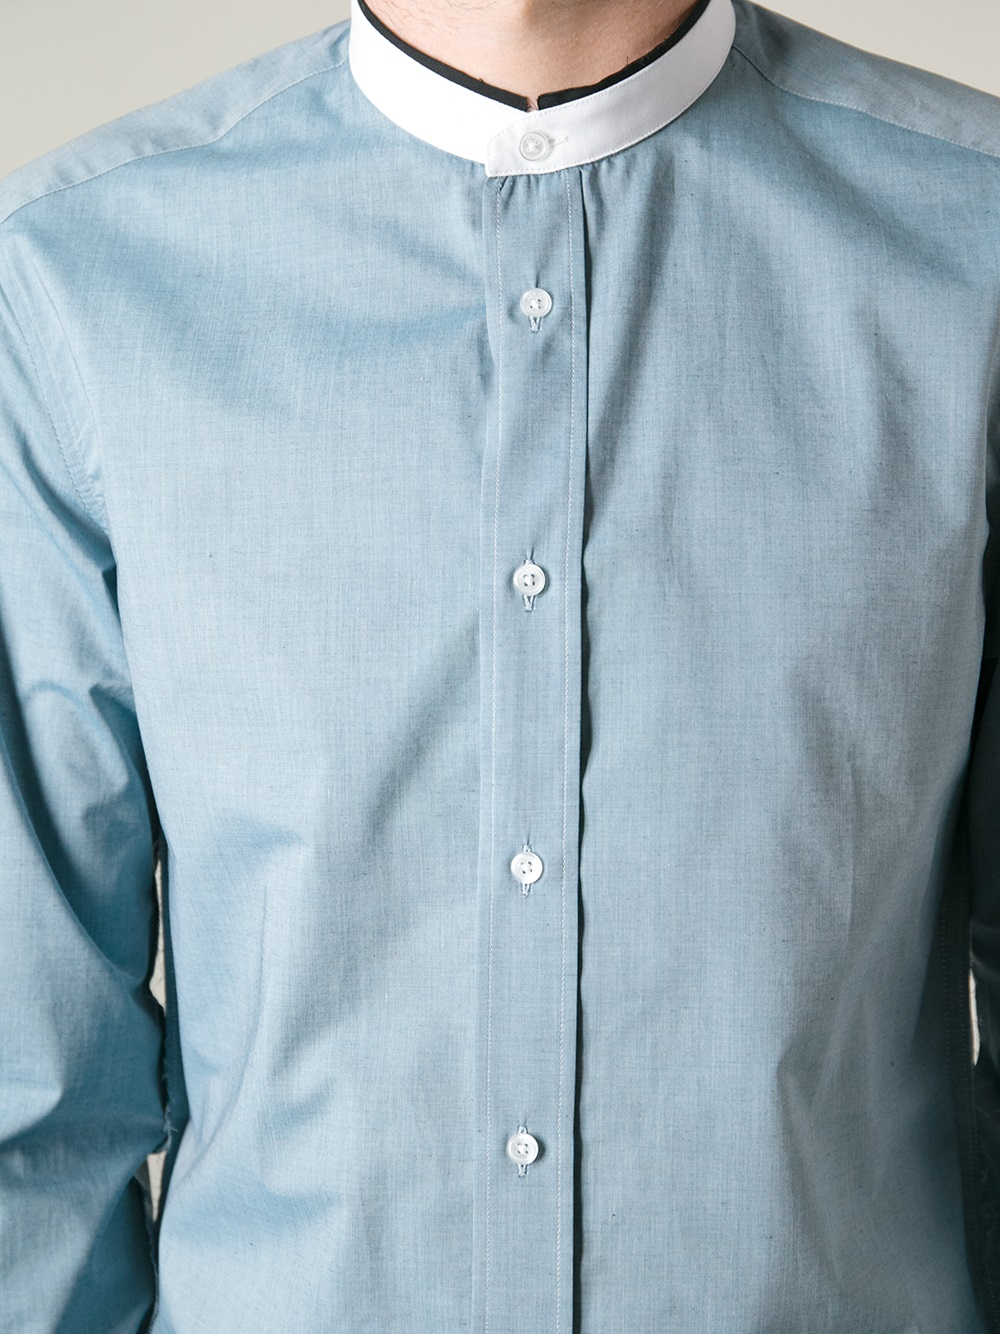 Lyst - Kenzo Band Collar Shirt in Blue for Men